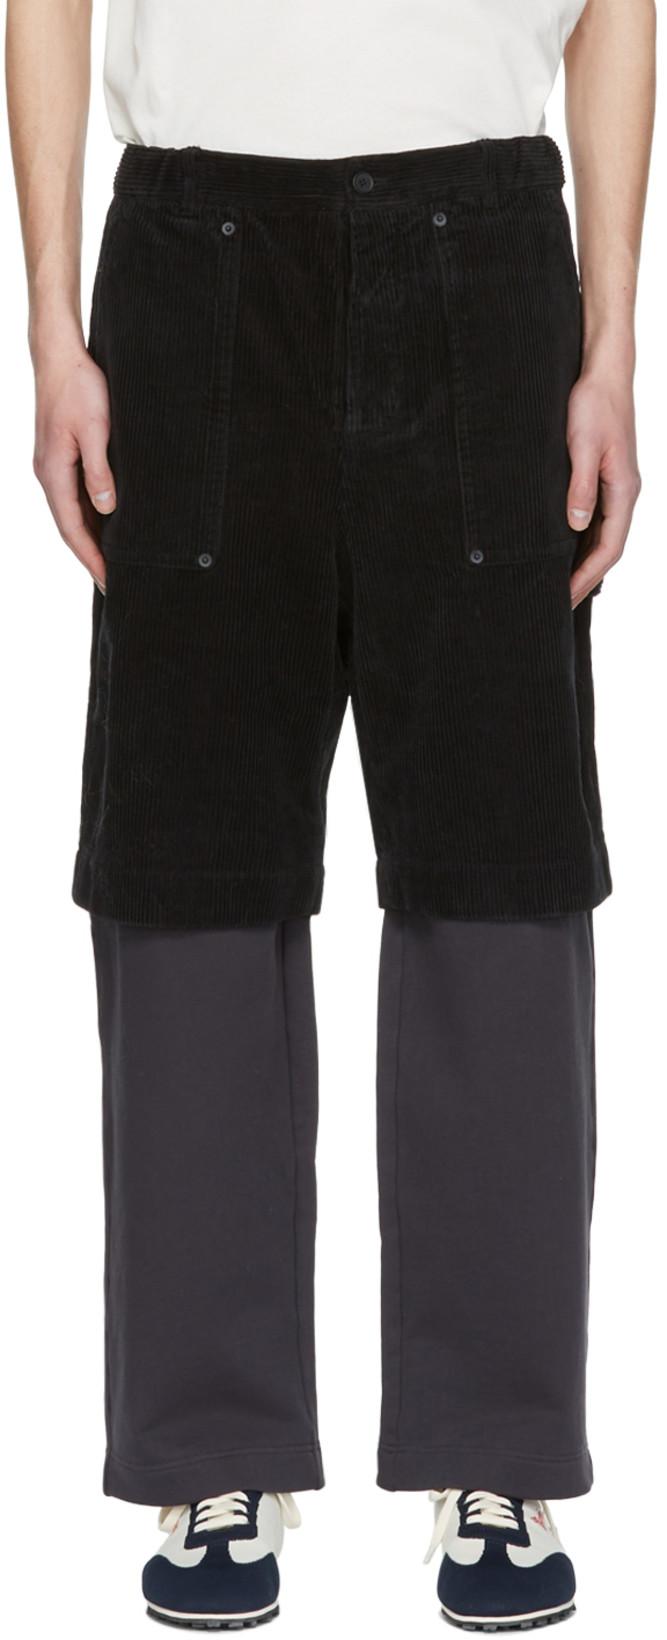 Black Cotton Trousers by A PERSONAL NOTE 73